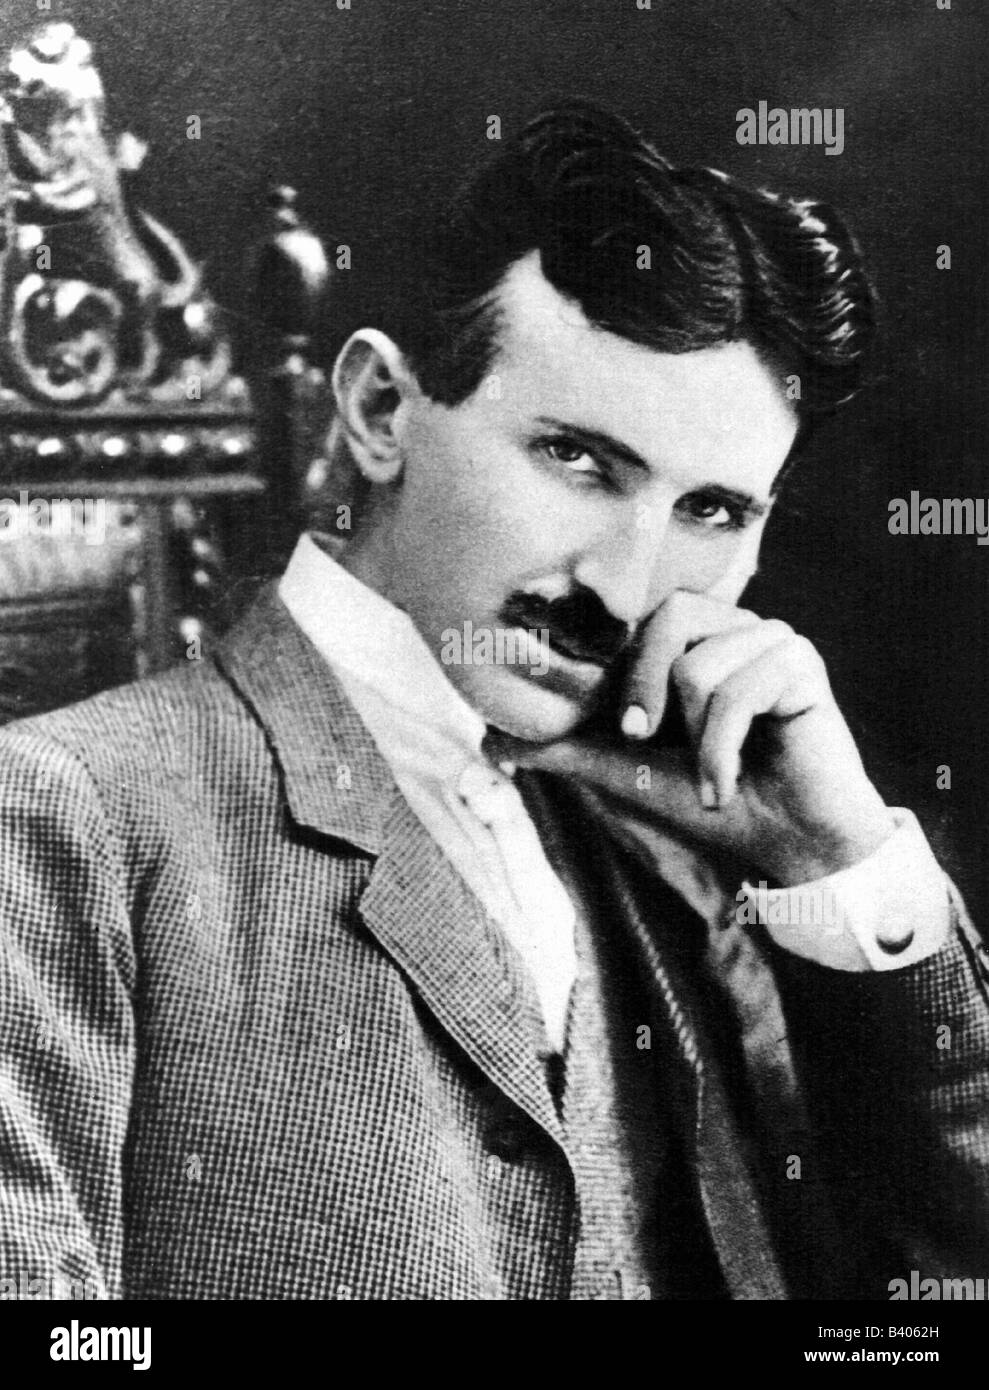 Tesla, Nicola 10.7.1856 - 18.1.1943, American scientist (physicist), mechanical engineer, electrical engineer, portrait, ca. 1880, 19th century,  science, physics, electricity, , Stock Photo